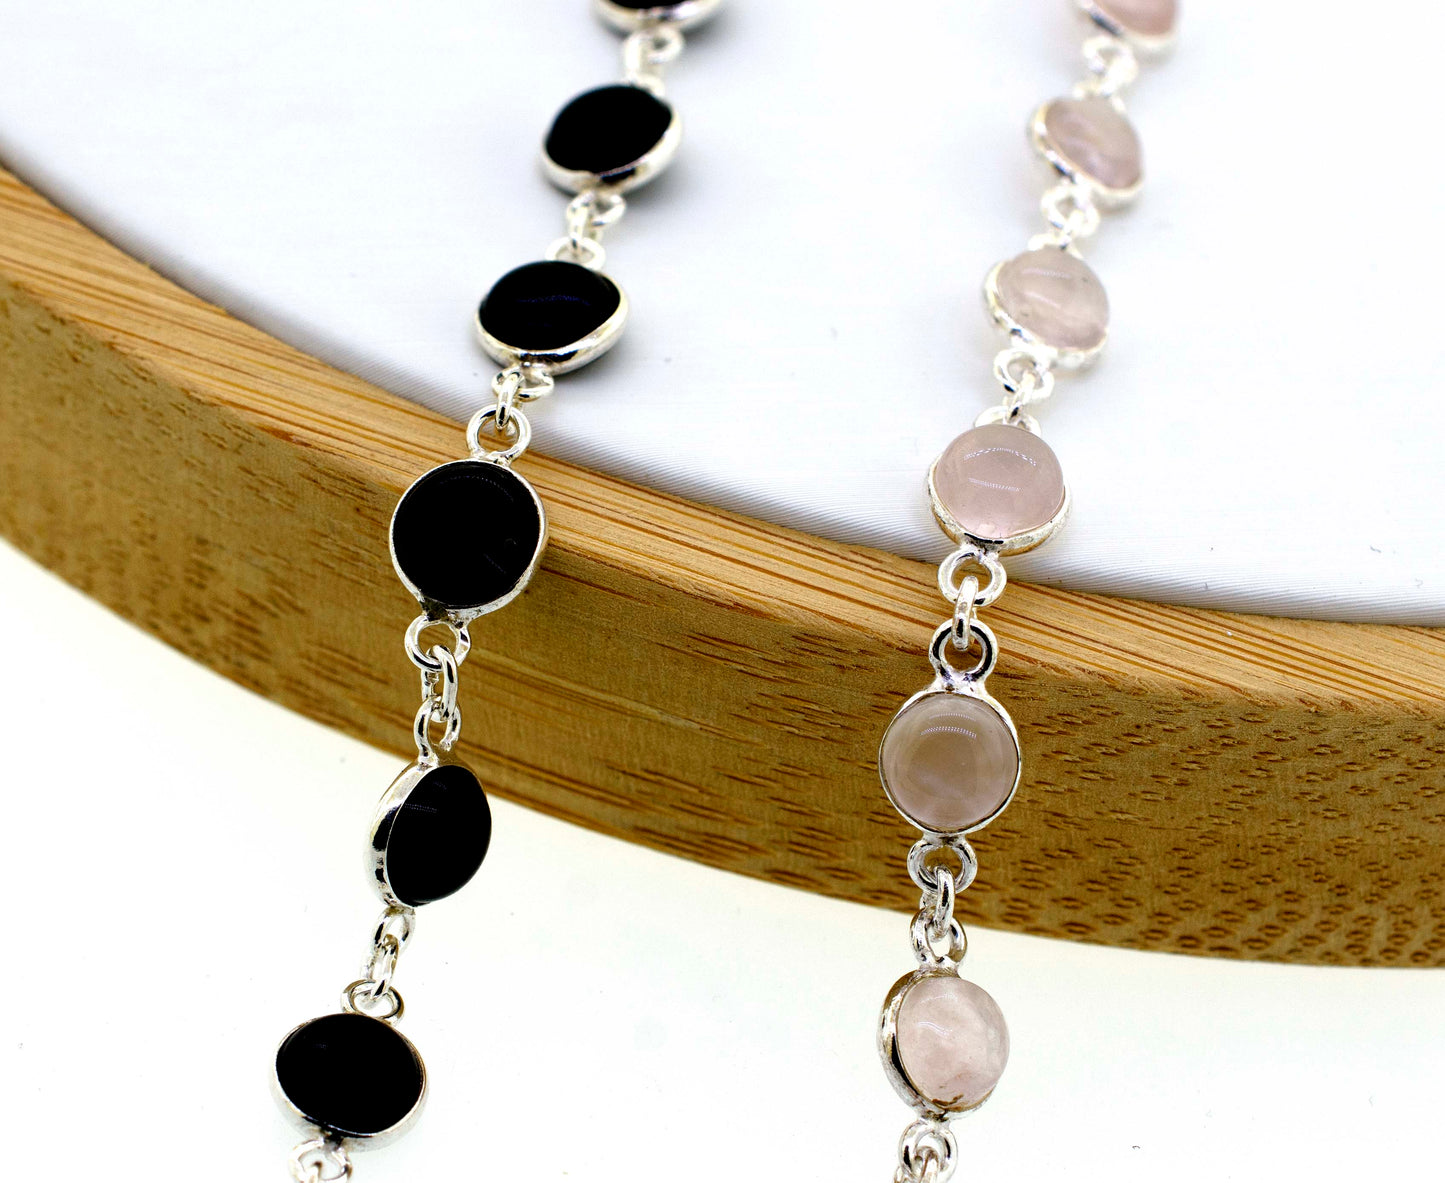 A delicate Super Silver necklace adorned with round black and pink Simple Round Gemstone Bracelet With Delicate Wire Setting stones, perfect for minimalism enthusiasts.